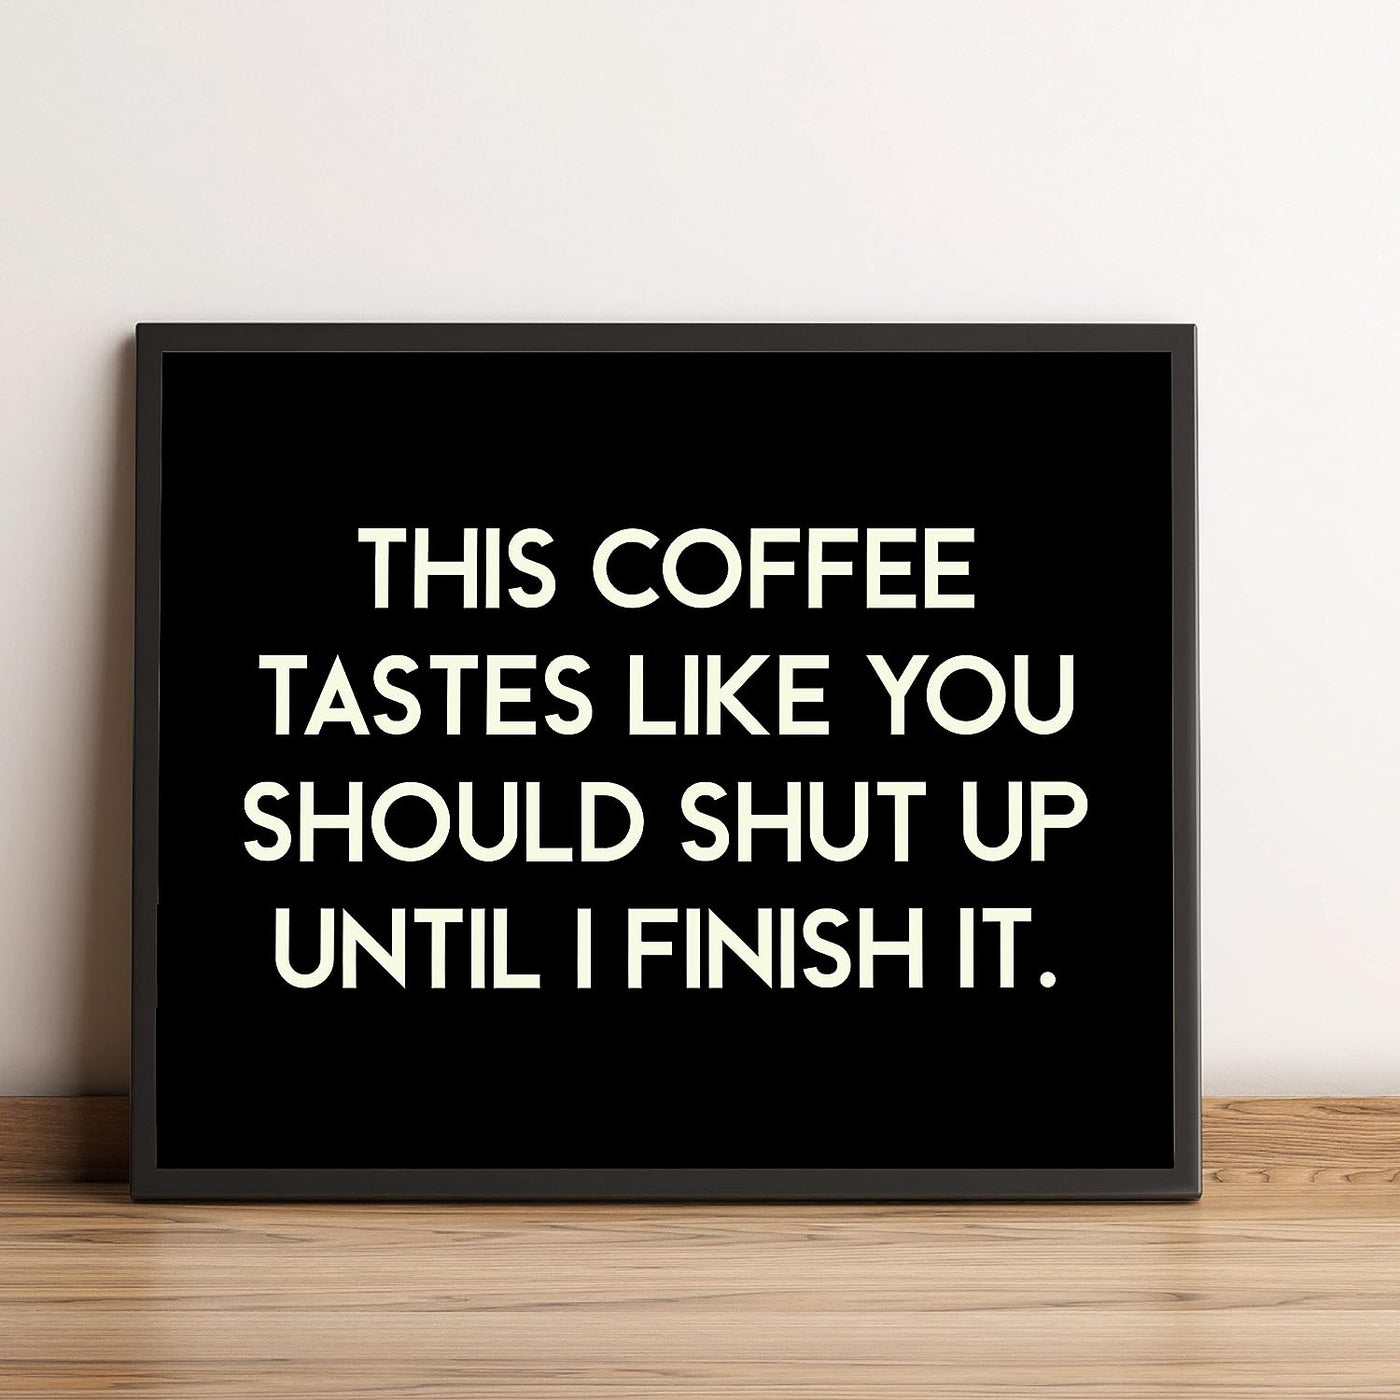 This Coffee Tastes Like You Should Shut Up Until I Finish It Funny Wall Sign -10 x 8" Sarcastic Art Print-Ready to Frame. Humorous Home-Kitchen-Office-Cafe Decor. Perfect Gift for Coffee Lovers!